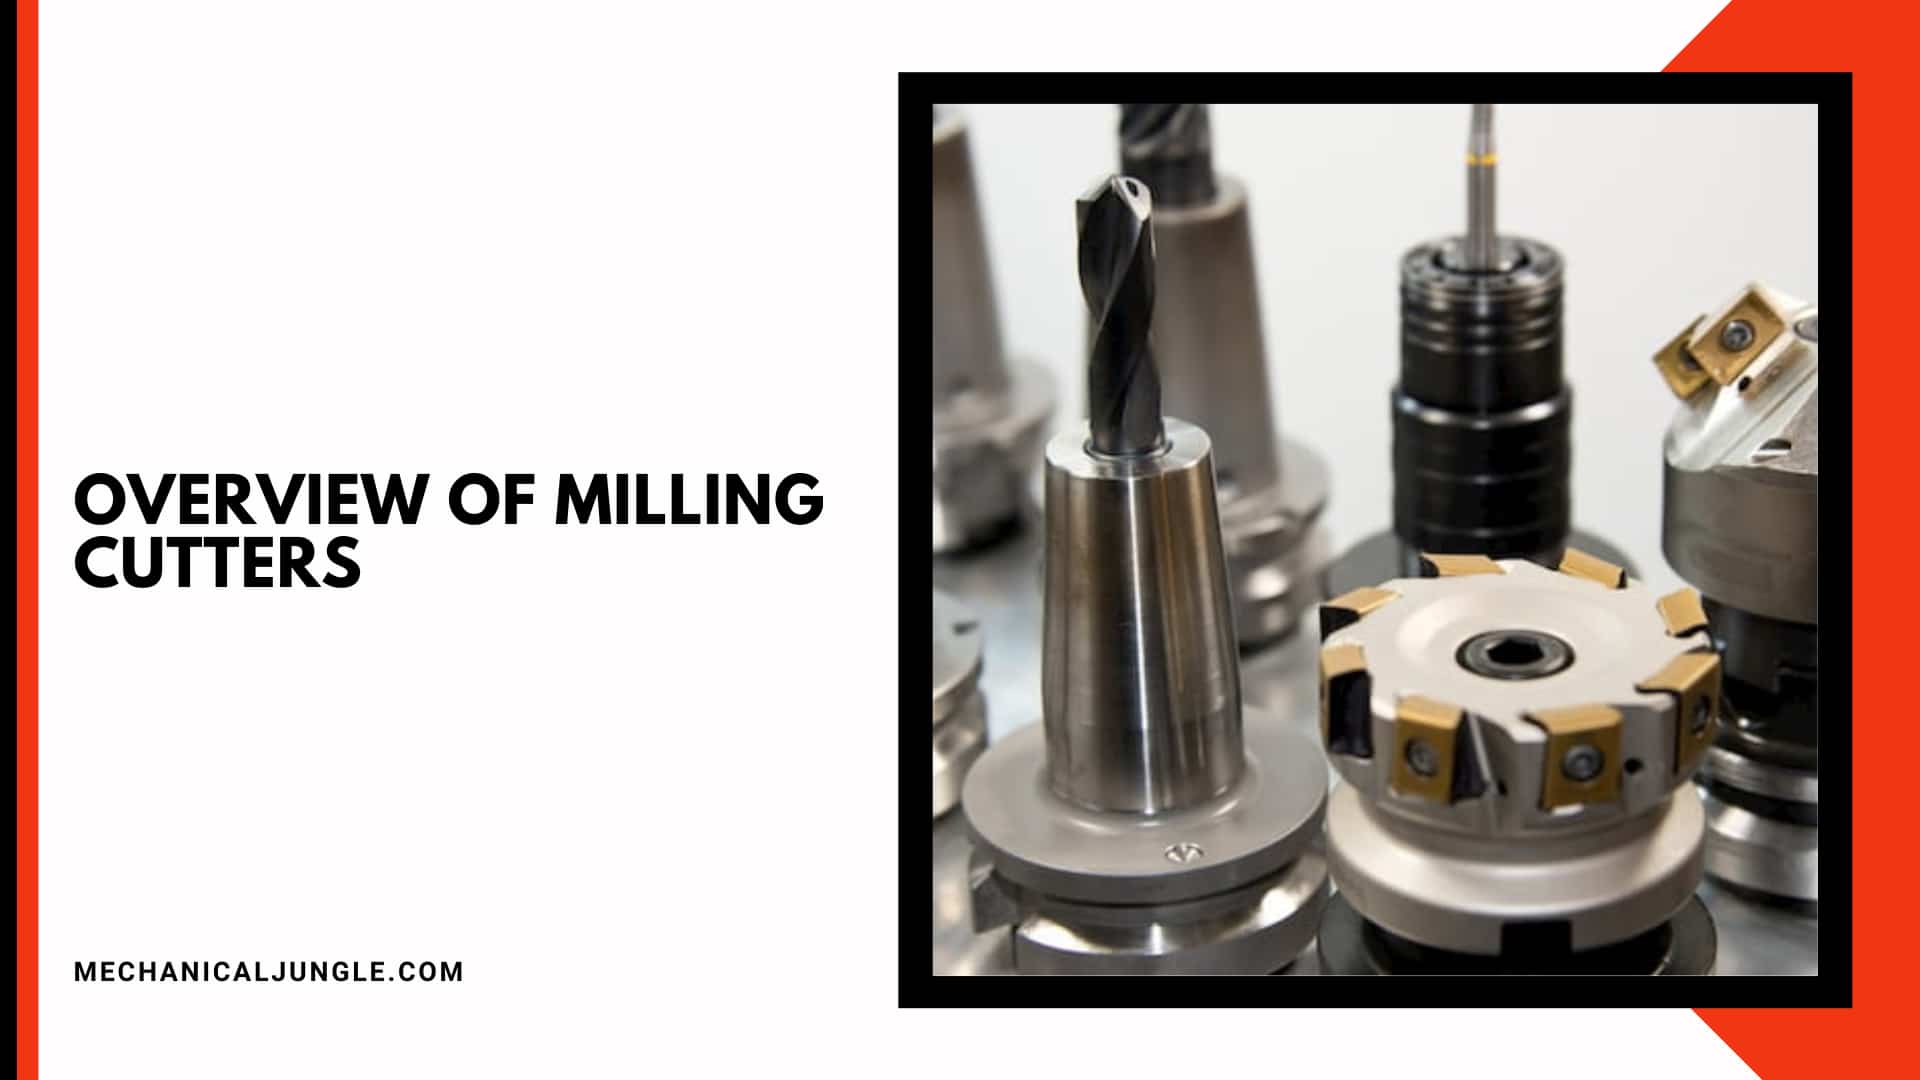 Overview of Milling Cutters